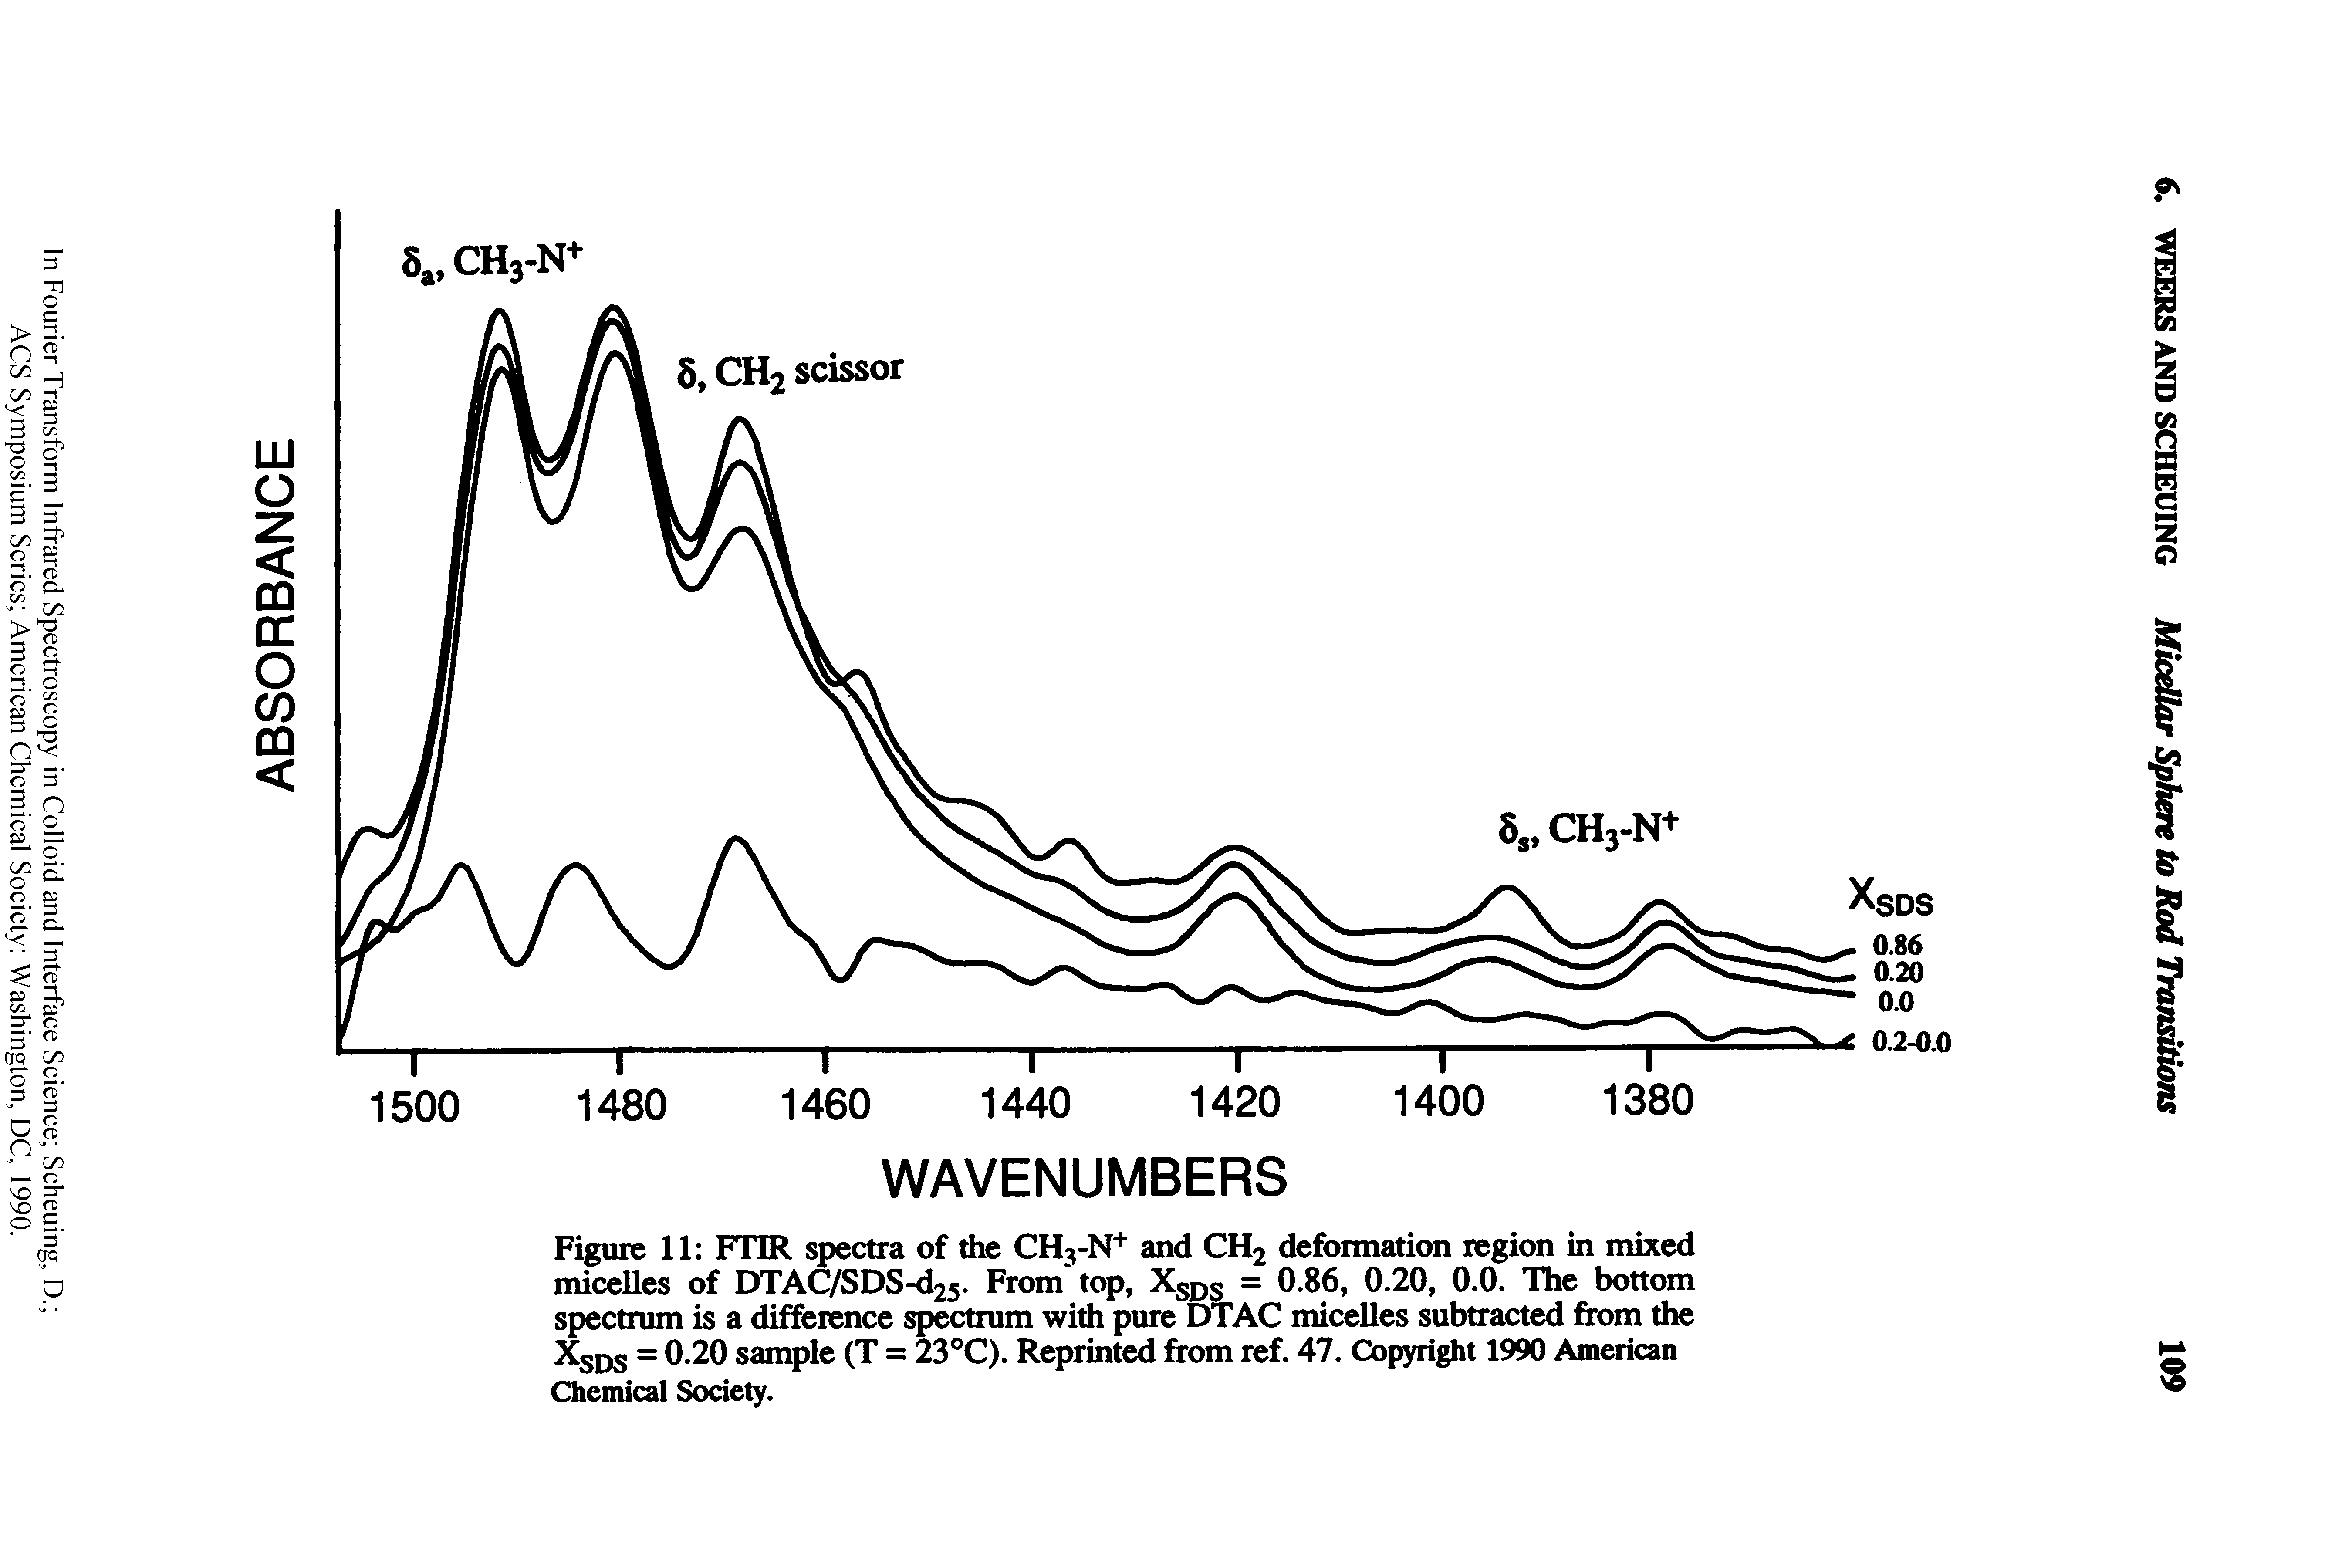 Figure 11 FTIR spectra of the CH3-N+ and CH2 deformation region in mixed micelles of DTAC/SDS-d25. From top, XSDS = 0.86, 0.20, 0.0. The bottom spectrum is a difference spectrum with pure DTAC micelles subtracted from the XSDs = 0.20 sample (T = 23°C). Reprinted from ref. 47. Copyright 1990 American Chemical Society.